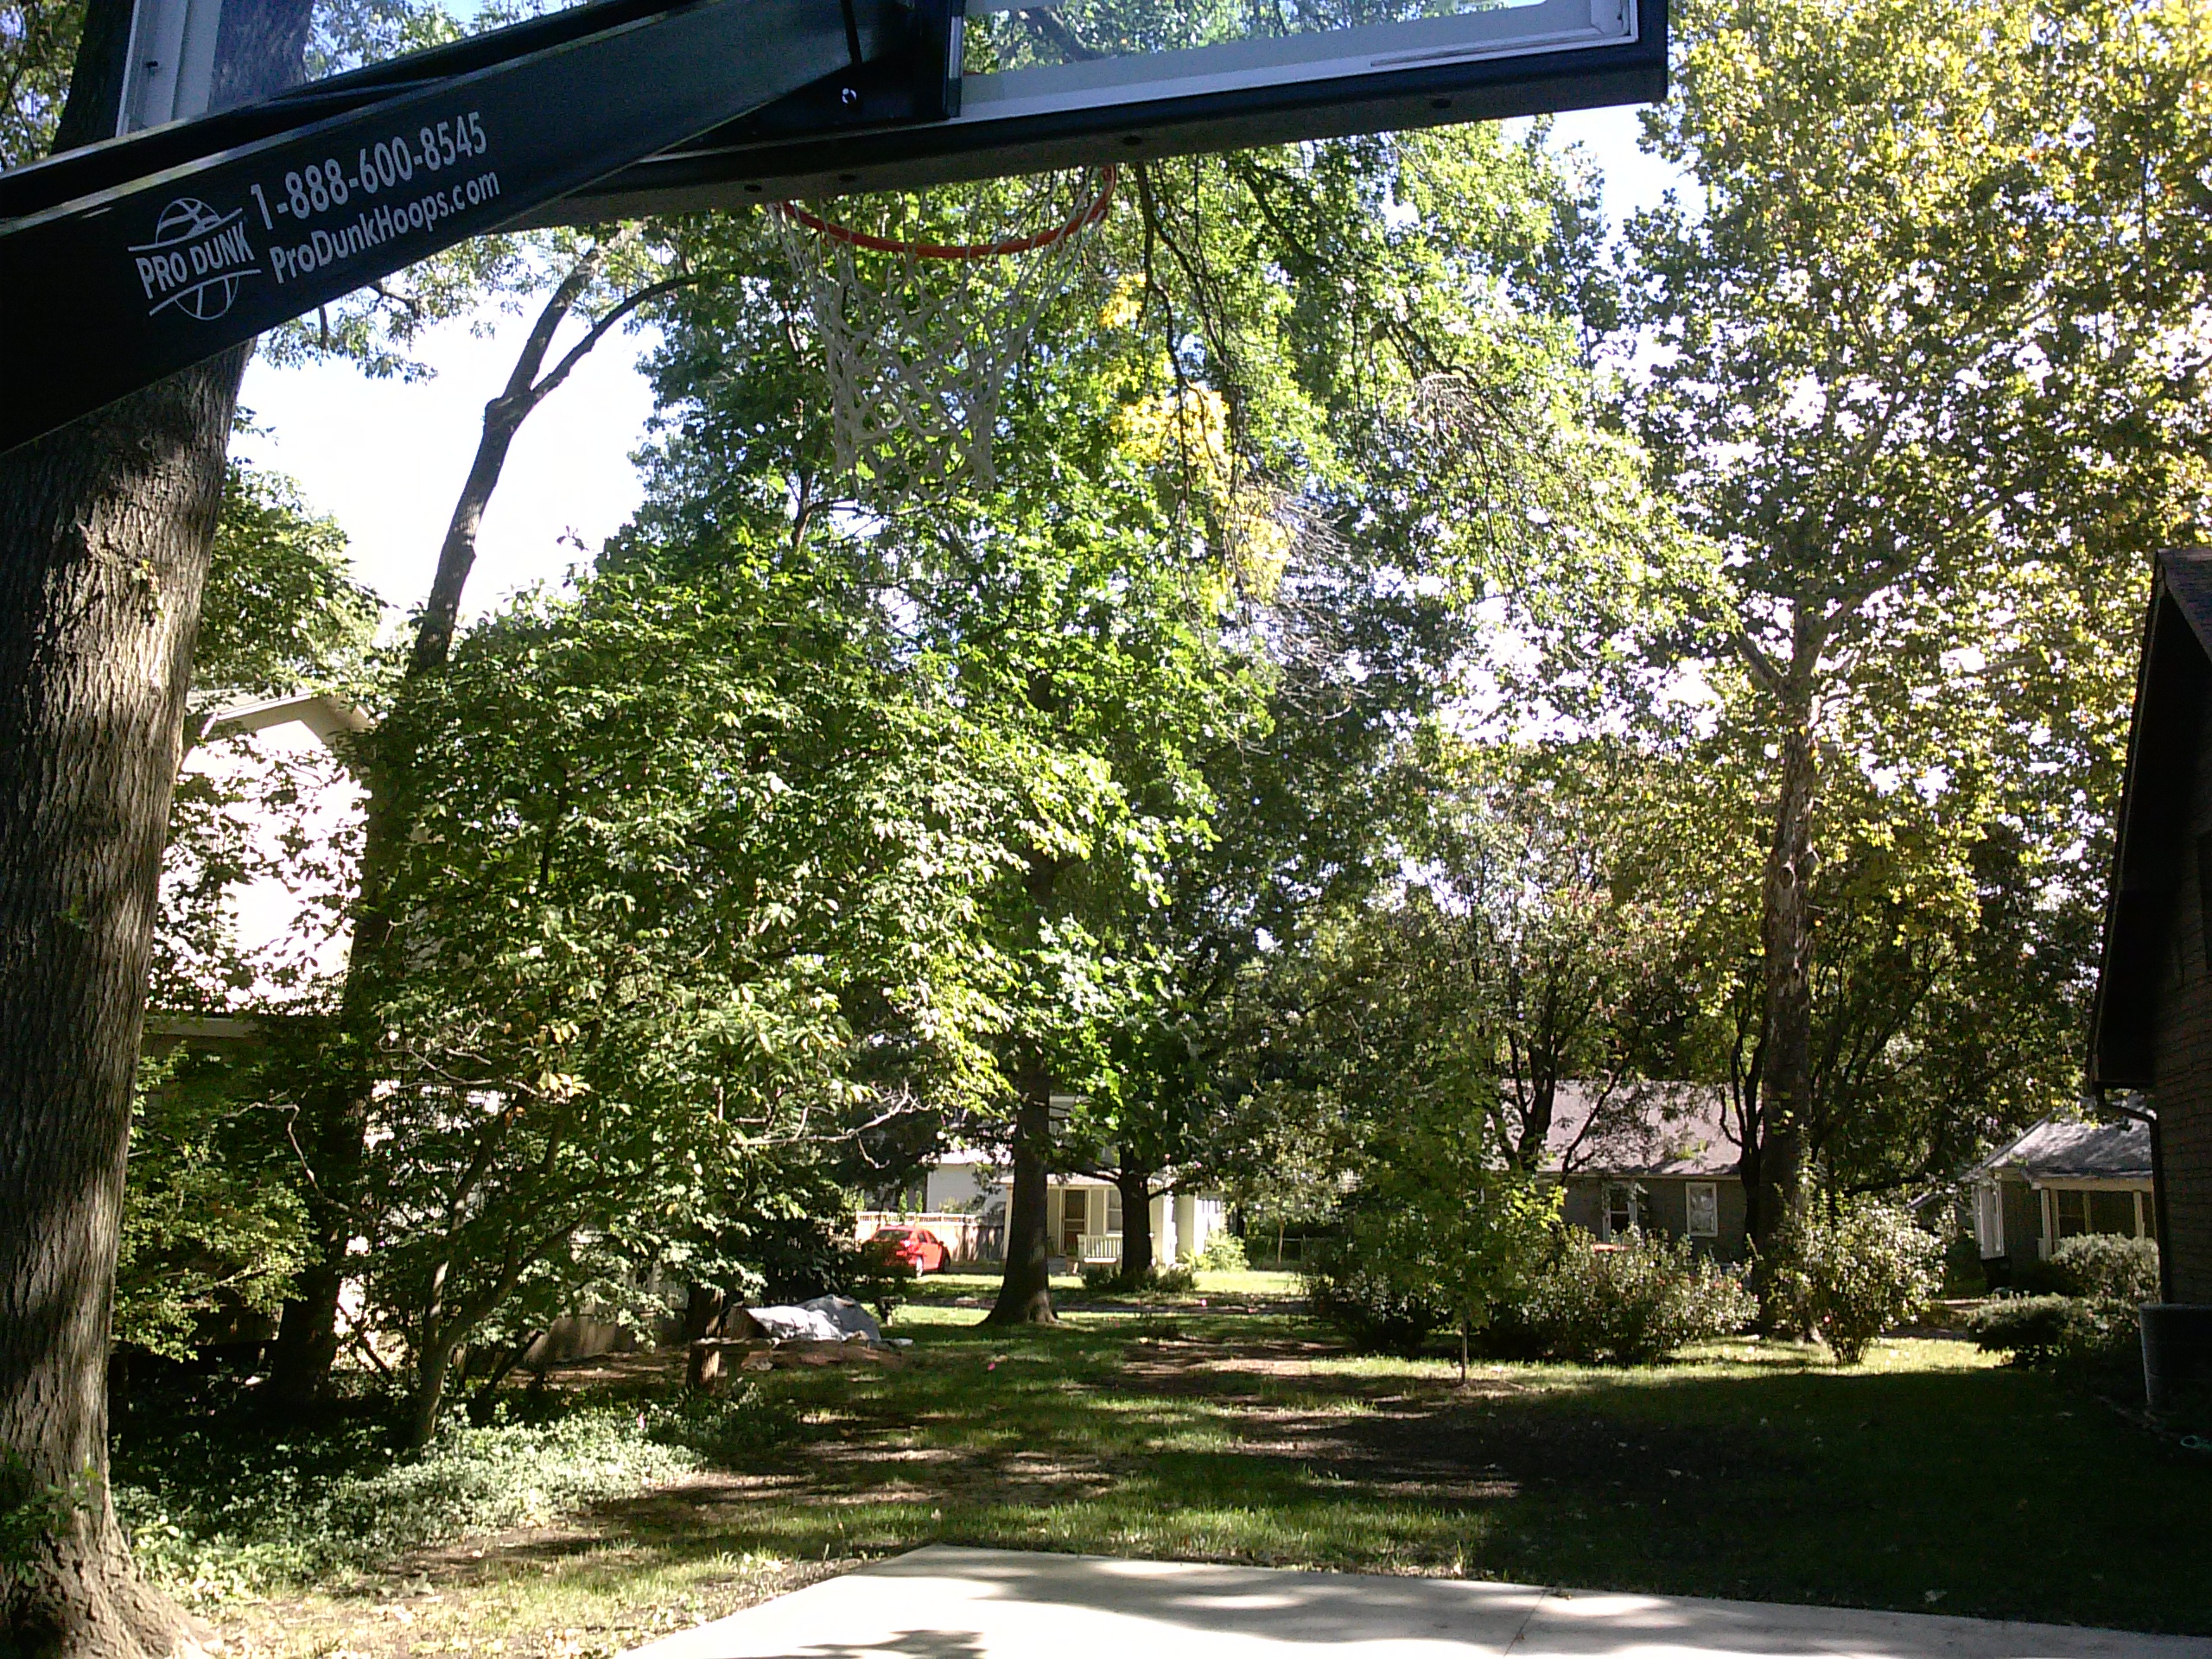 This behind the goal view shows the Pro Dunk Platinum Basketball installed in this Kansas backyard.